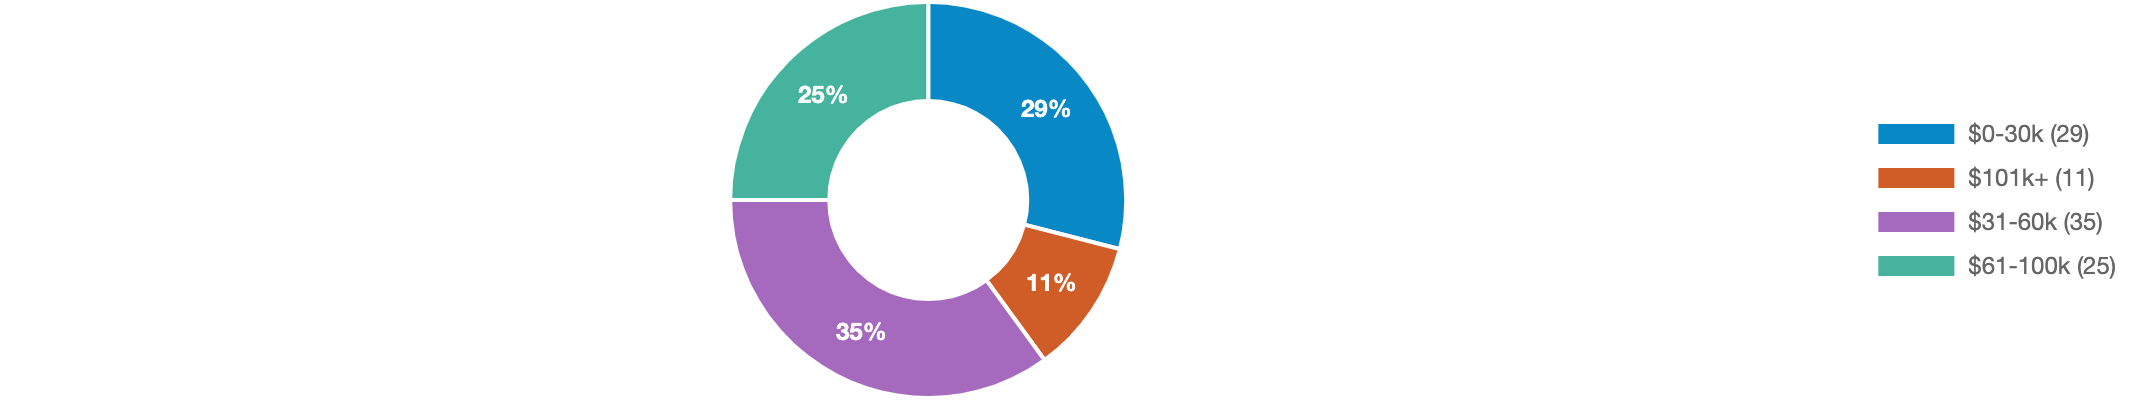 Black Friday shopping poll: income breakdown of respondents